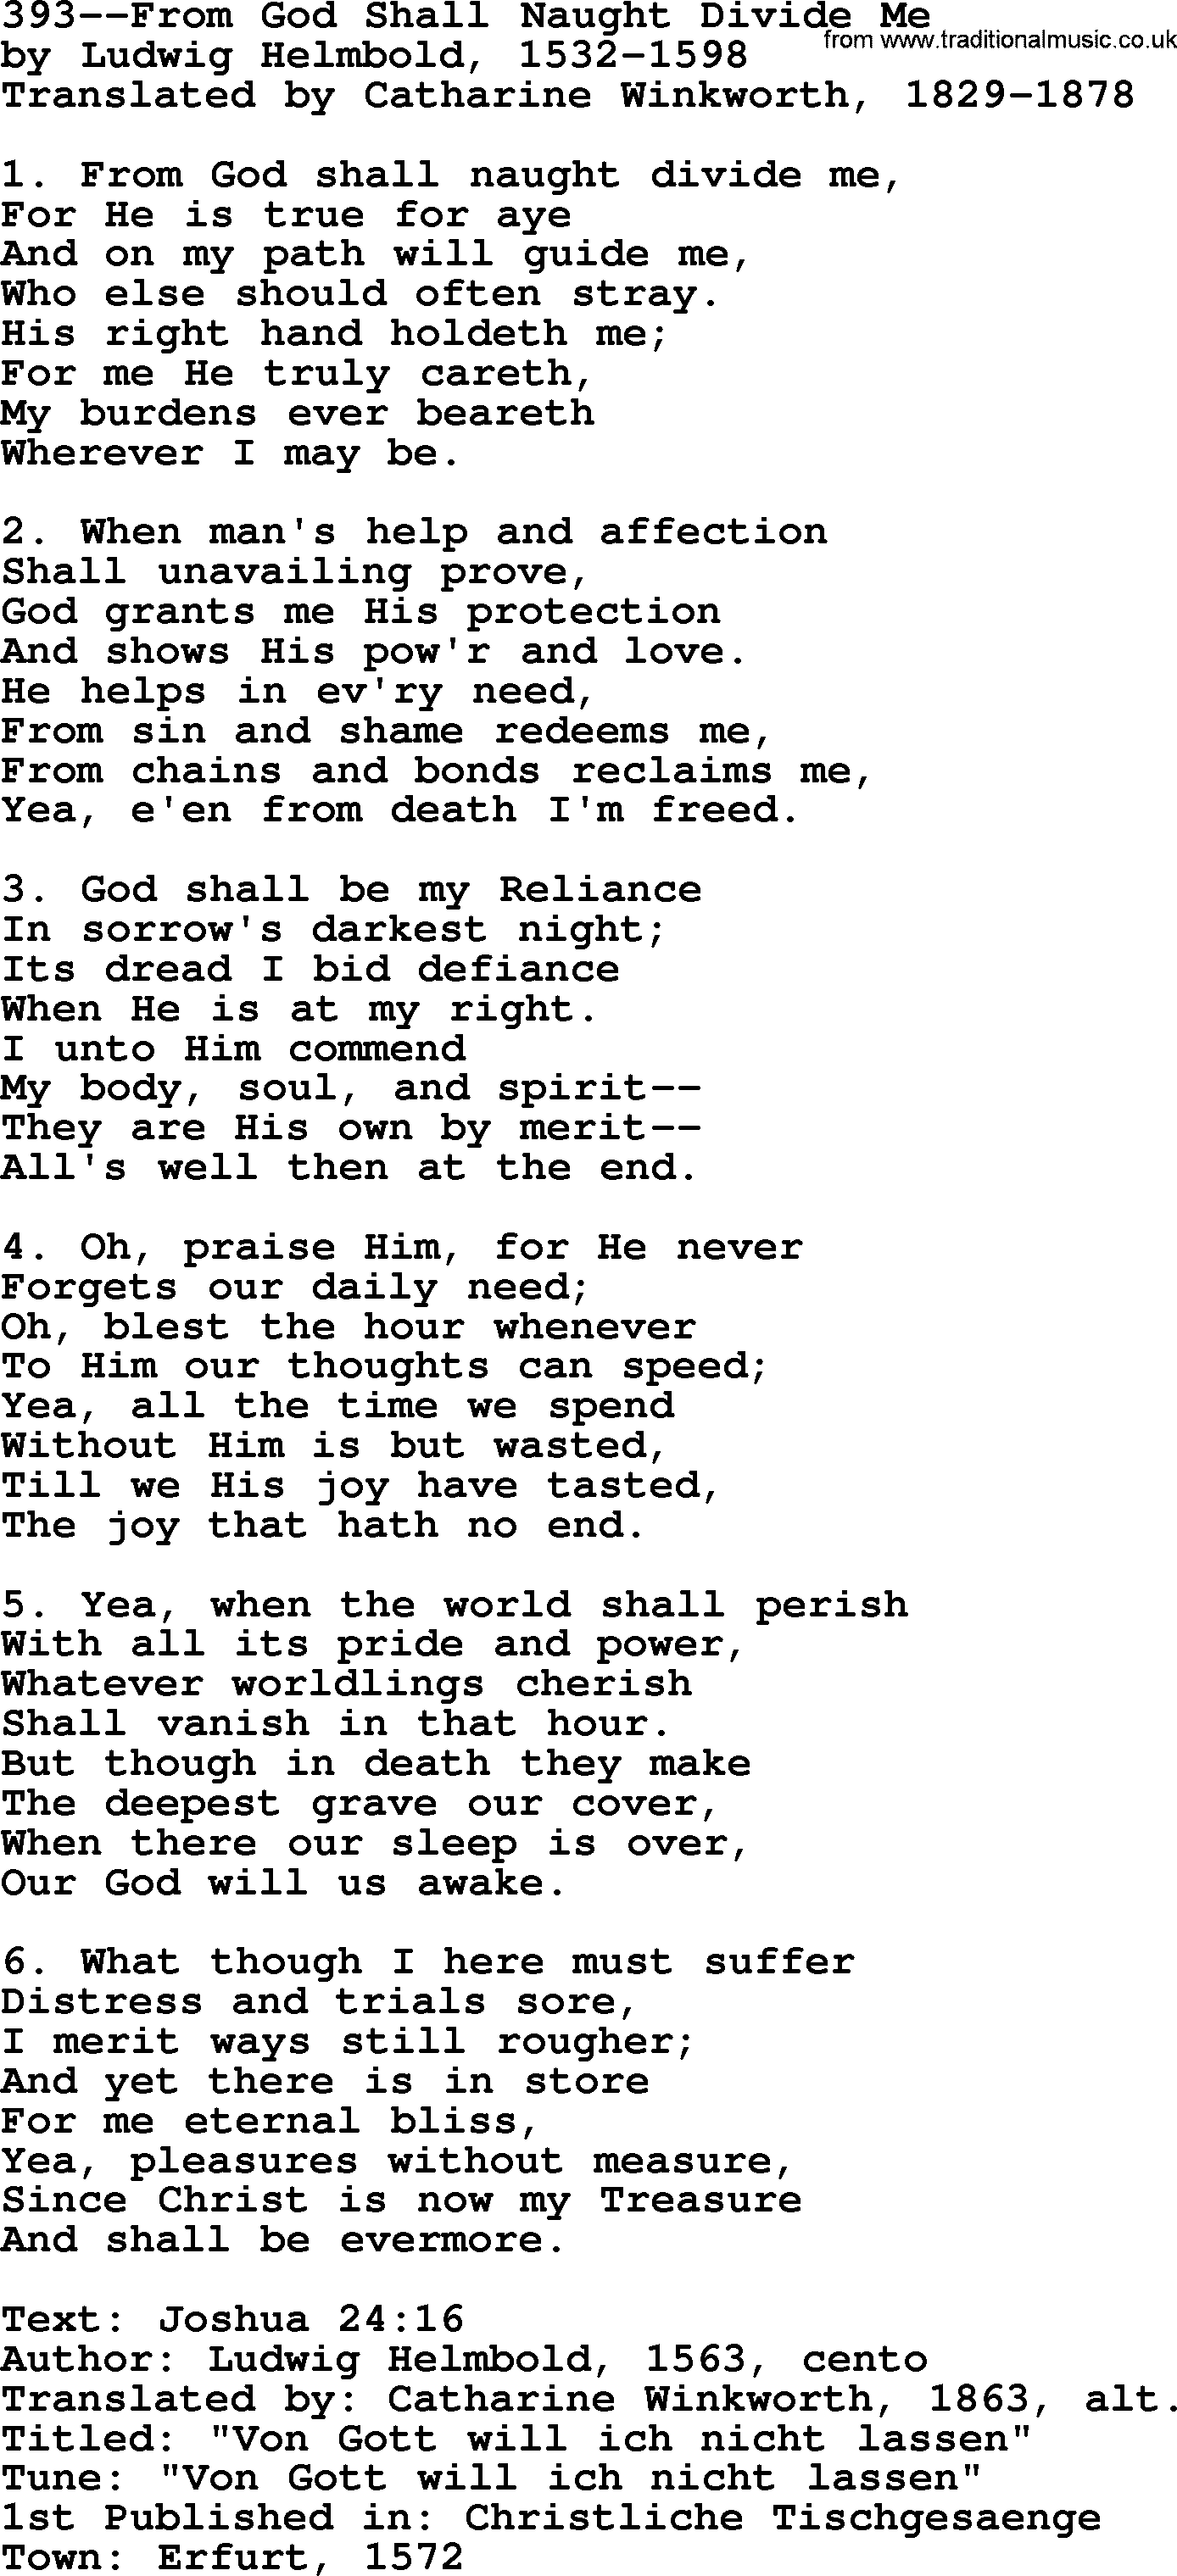 Lutheran Hymn: 393--From God Shall Naught Divide Me.txt lyrics with PDF